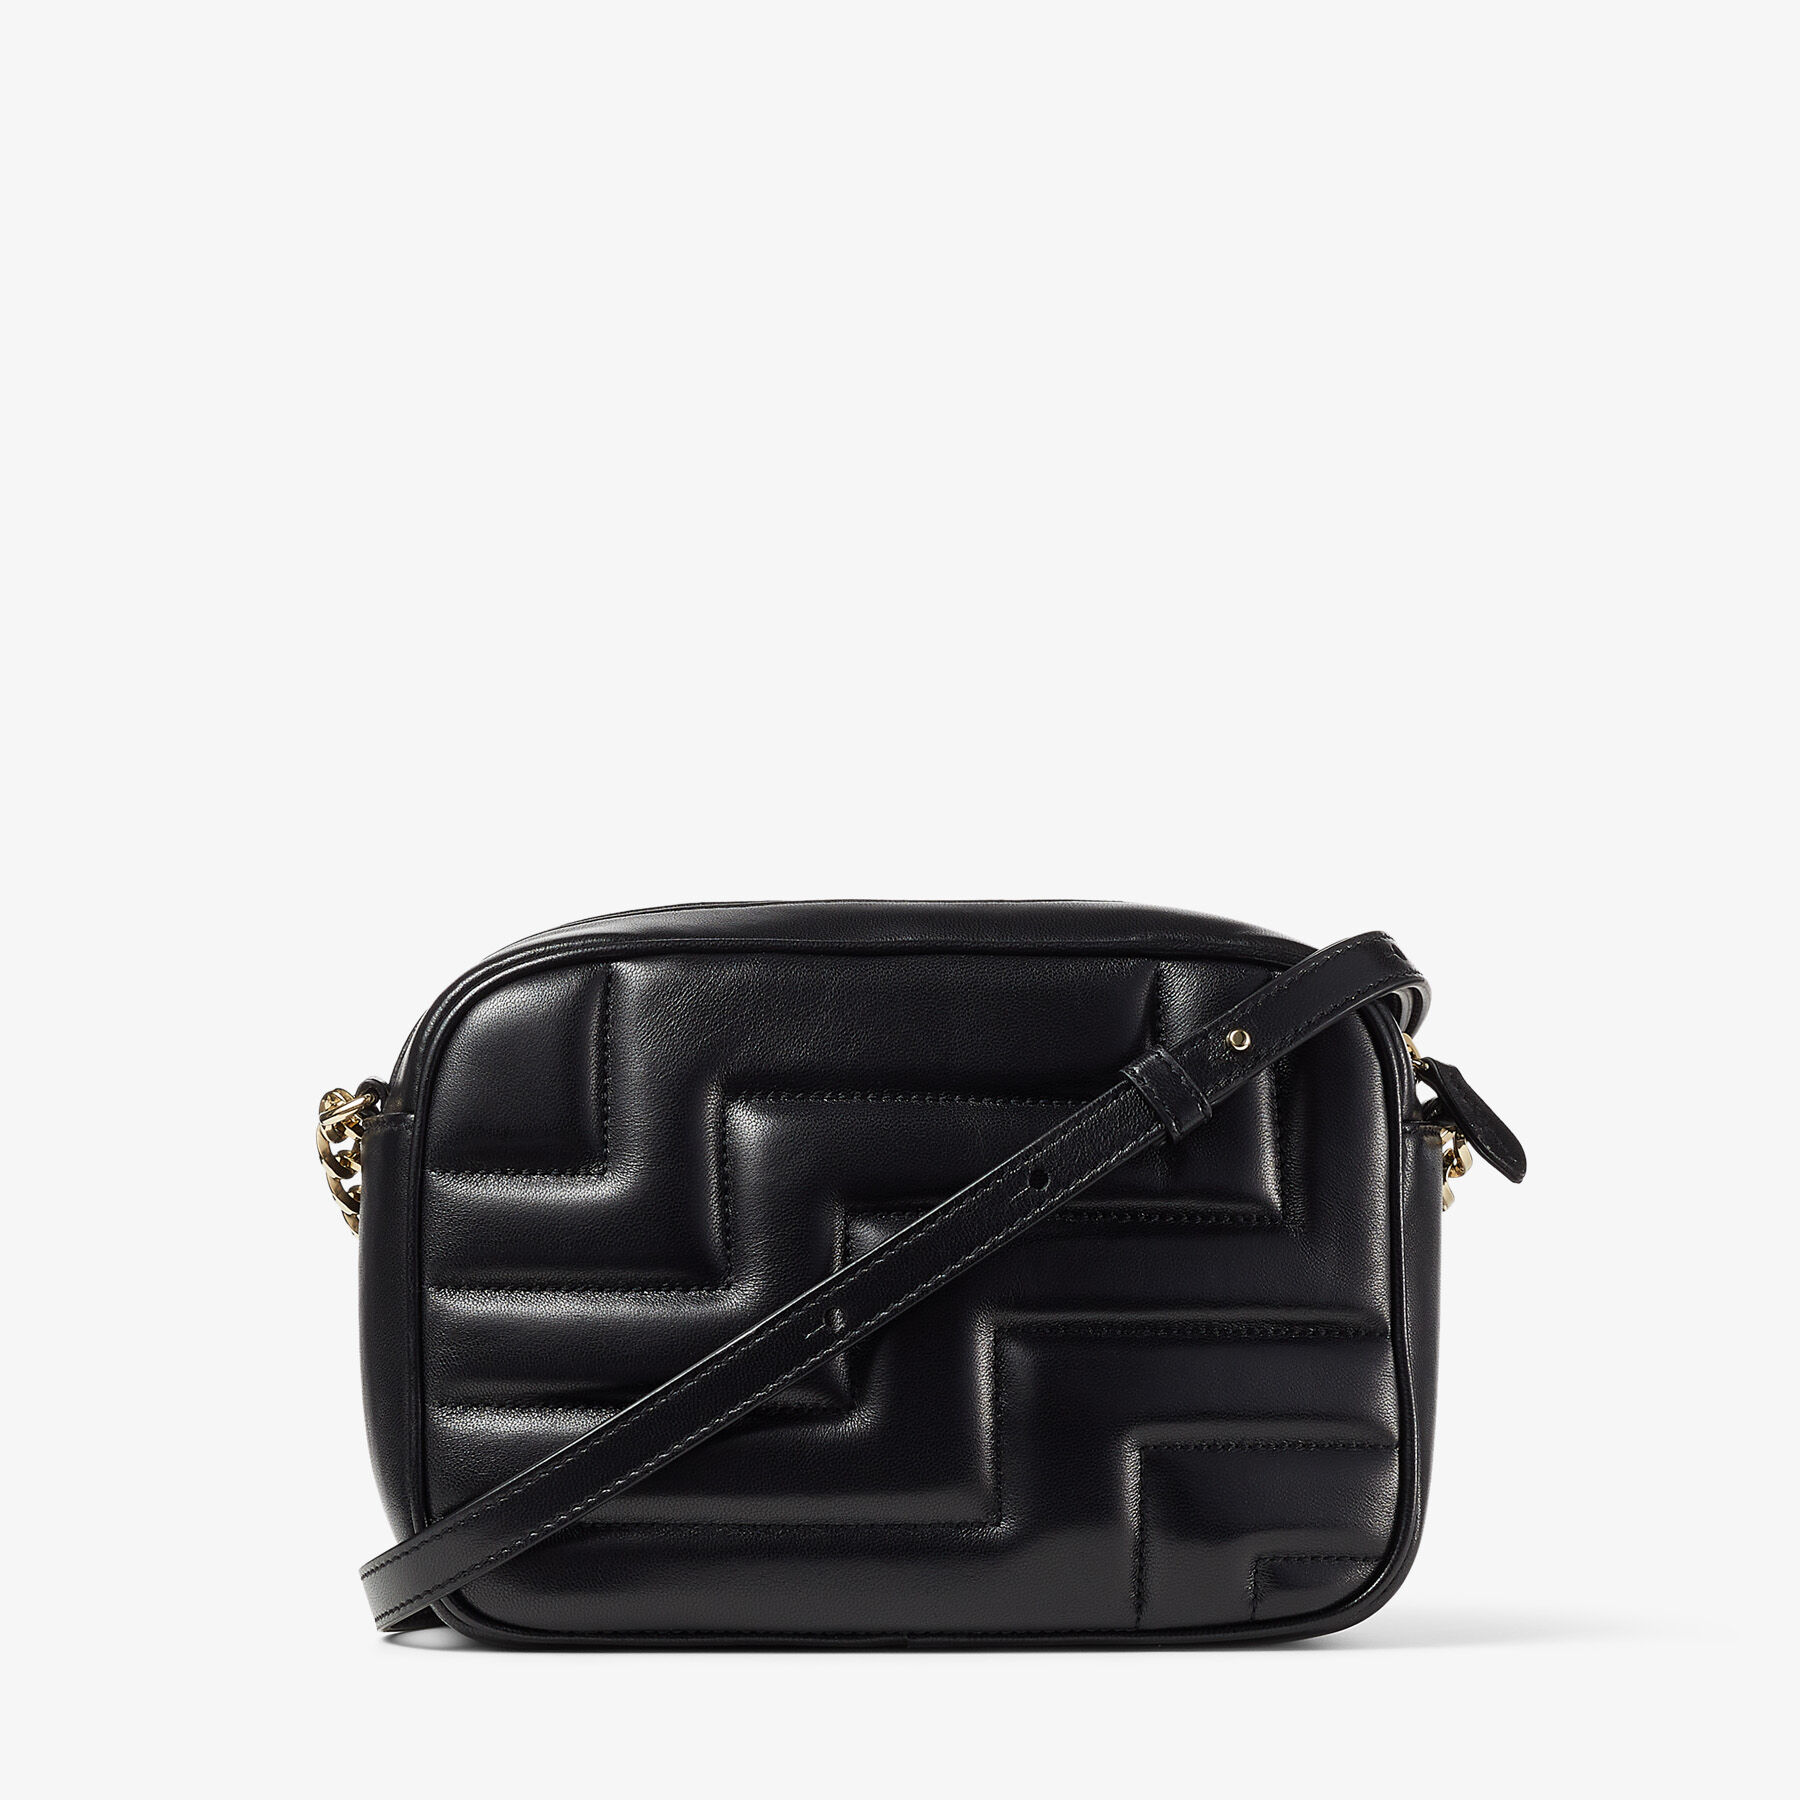 AVENUE CAMERA/M, Black Quilted Nappa Leather Camera Bag